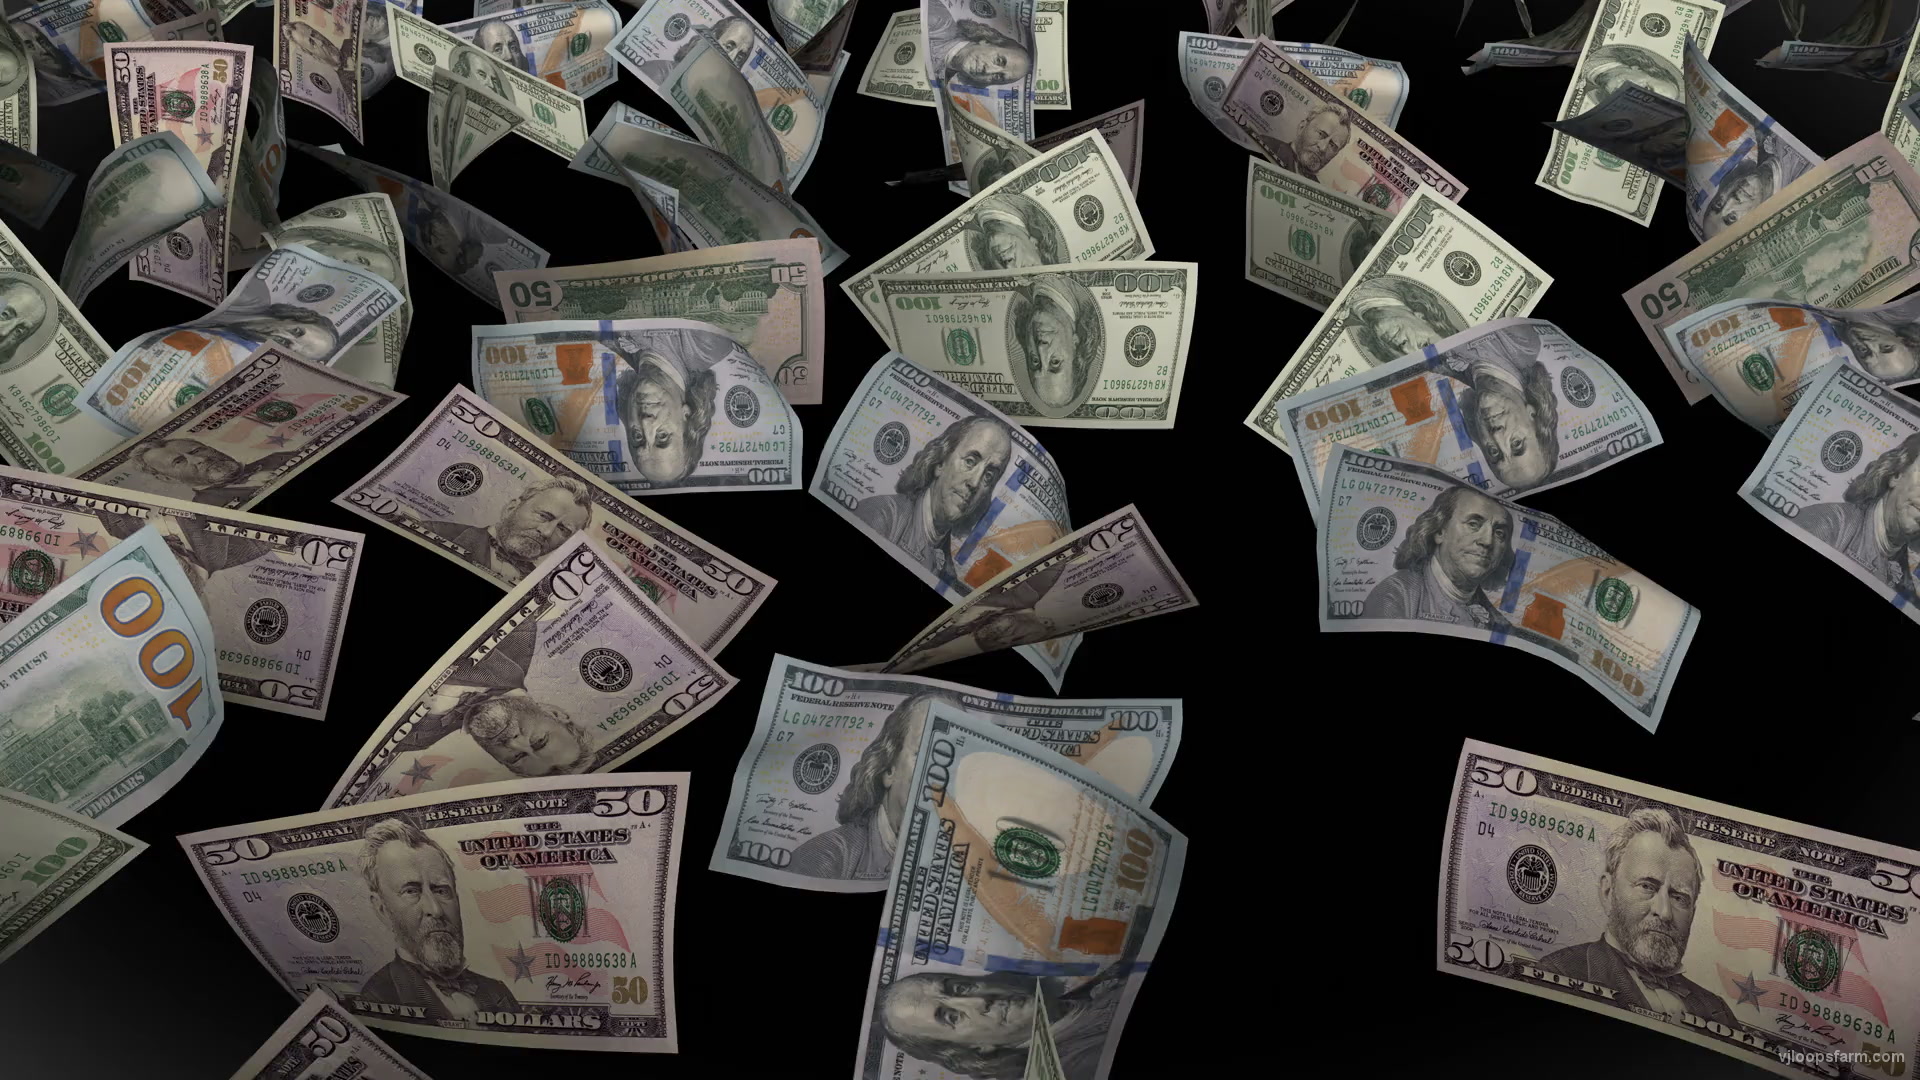 Slowly moving down raws of flying US dollar bills currency on black background